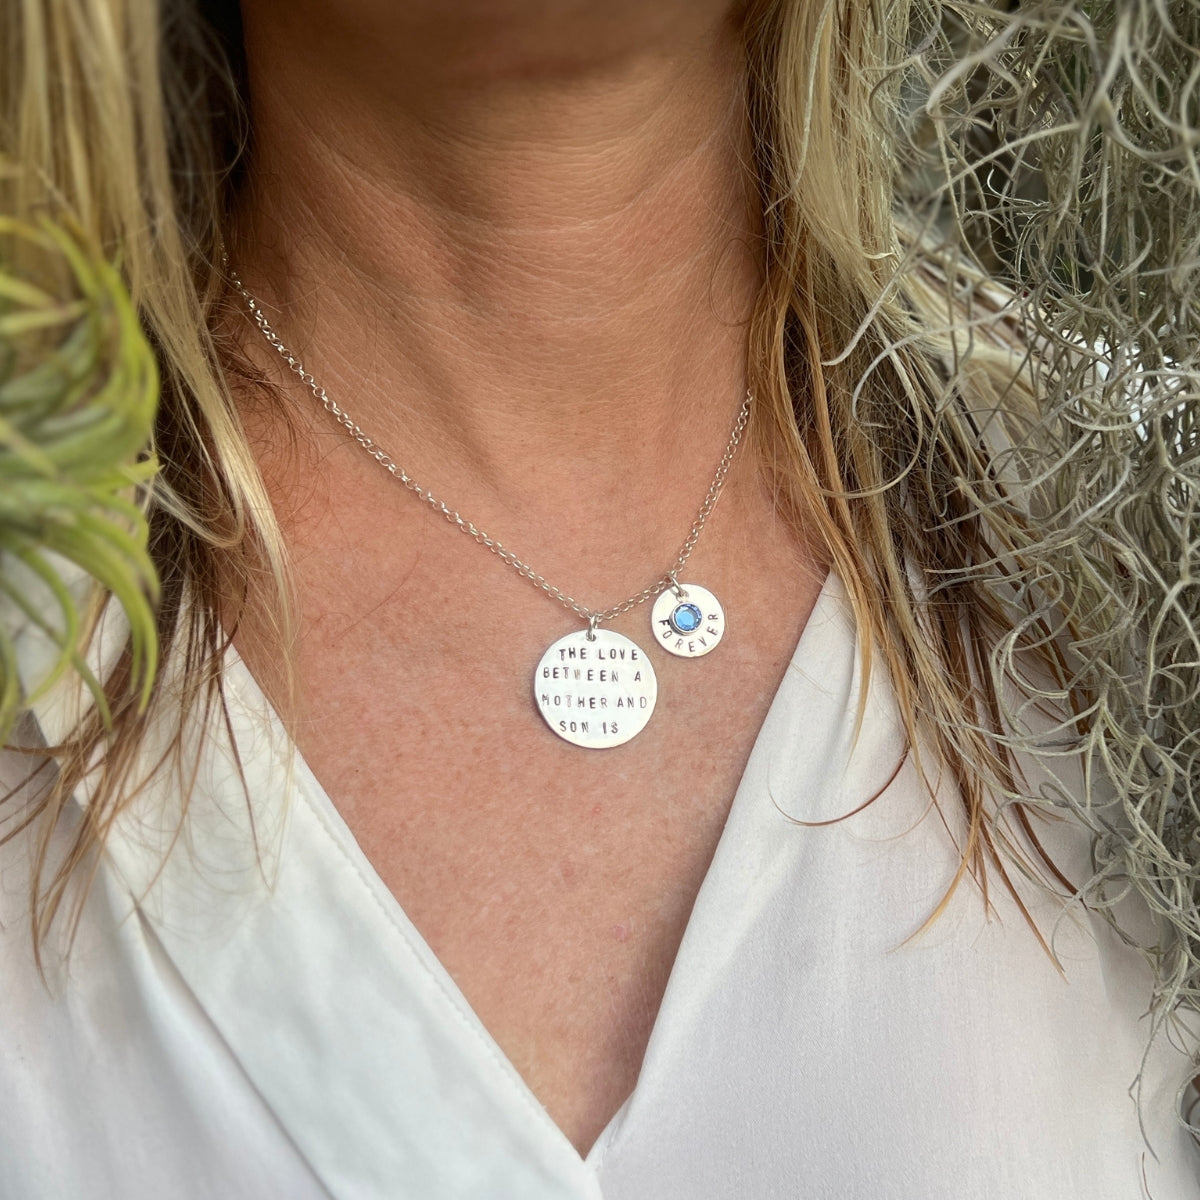 Love Between a Mother and Her Kids is Forever Necklace